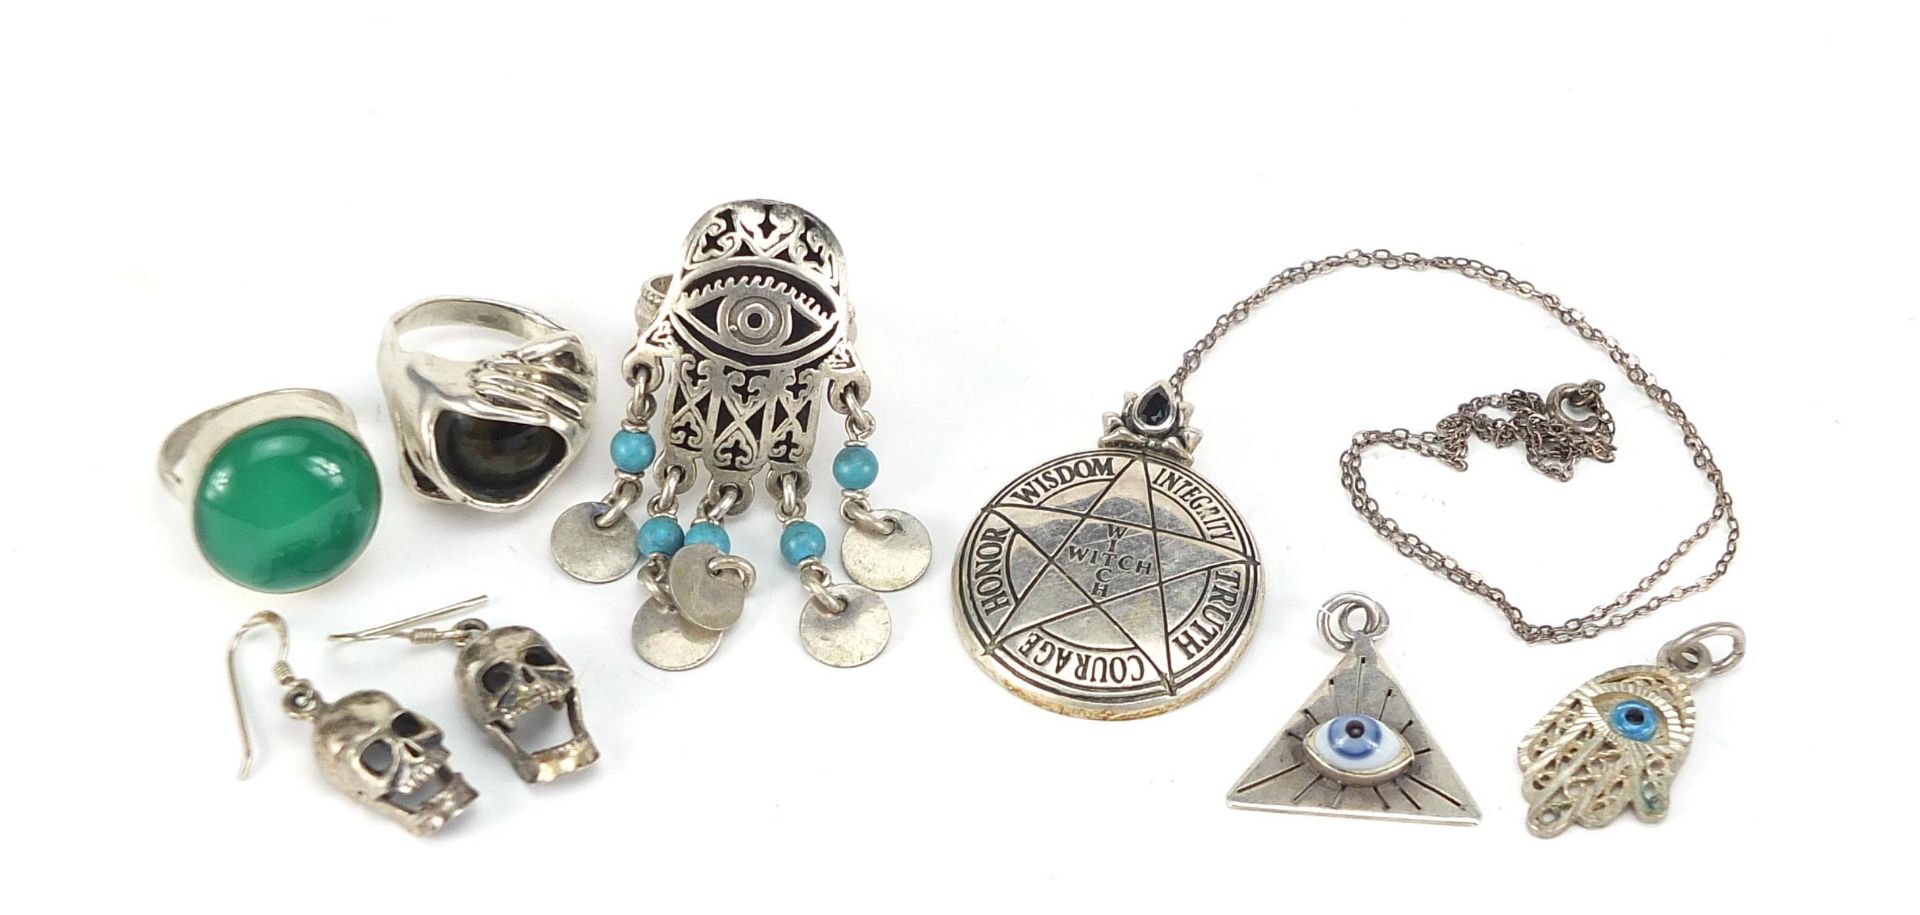 Silver jewellery including human skull design earrings, all seeing eye ring and pendant and a